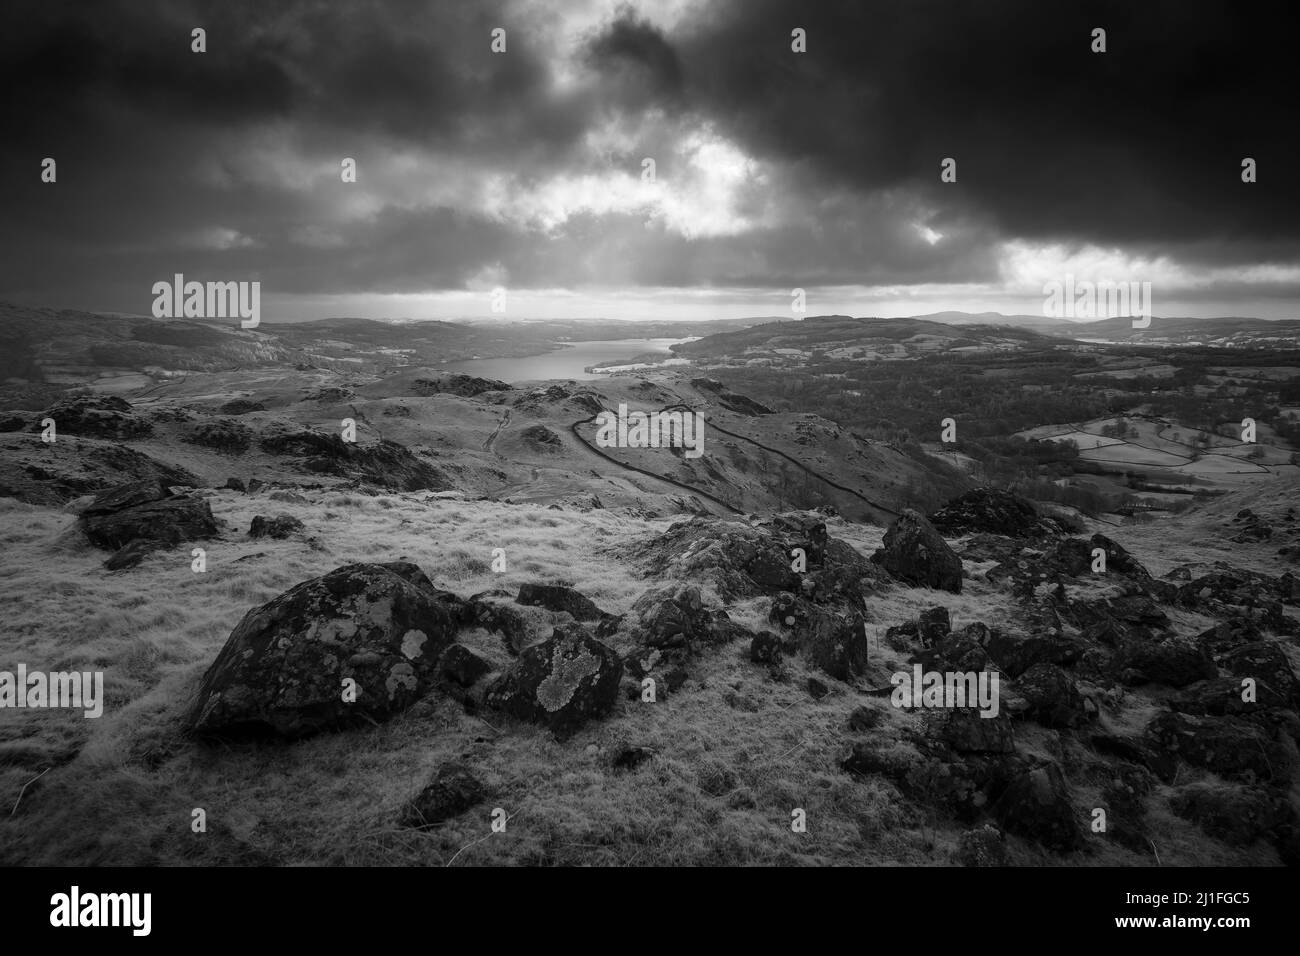 A black and white image of Loughrigg Fell with lake Windermere beyond in the Lake District National Park, Cumbria, England. Stock Photo